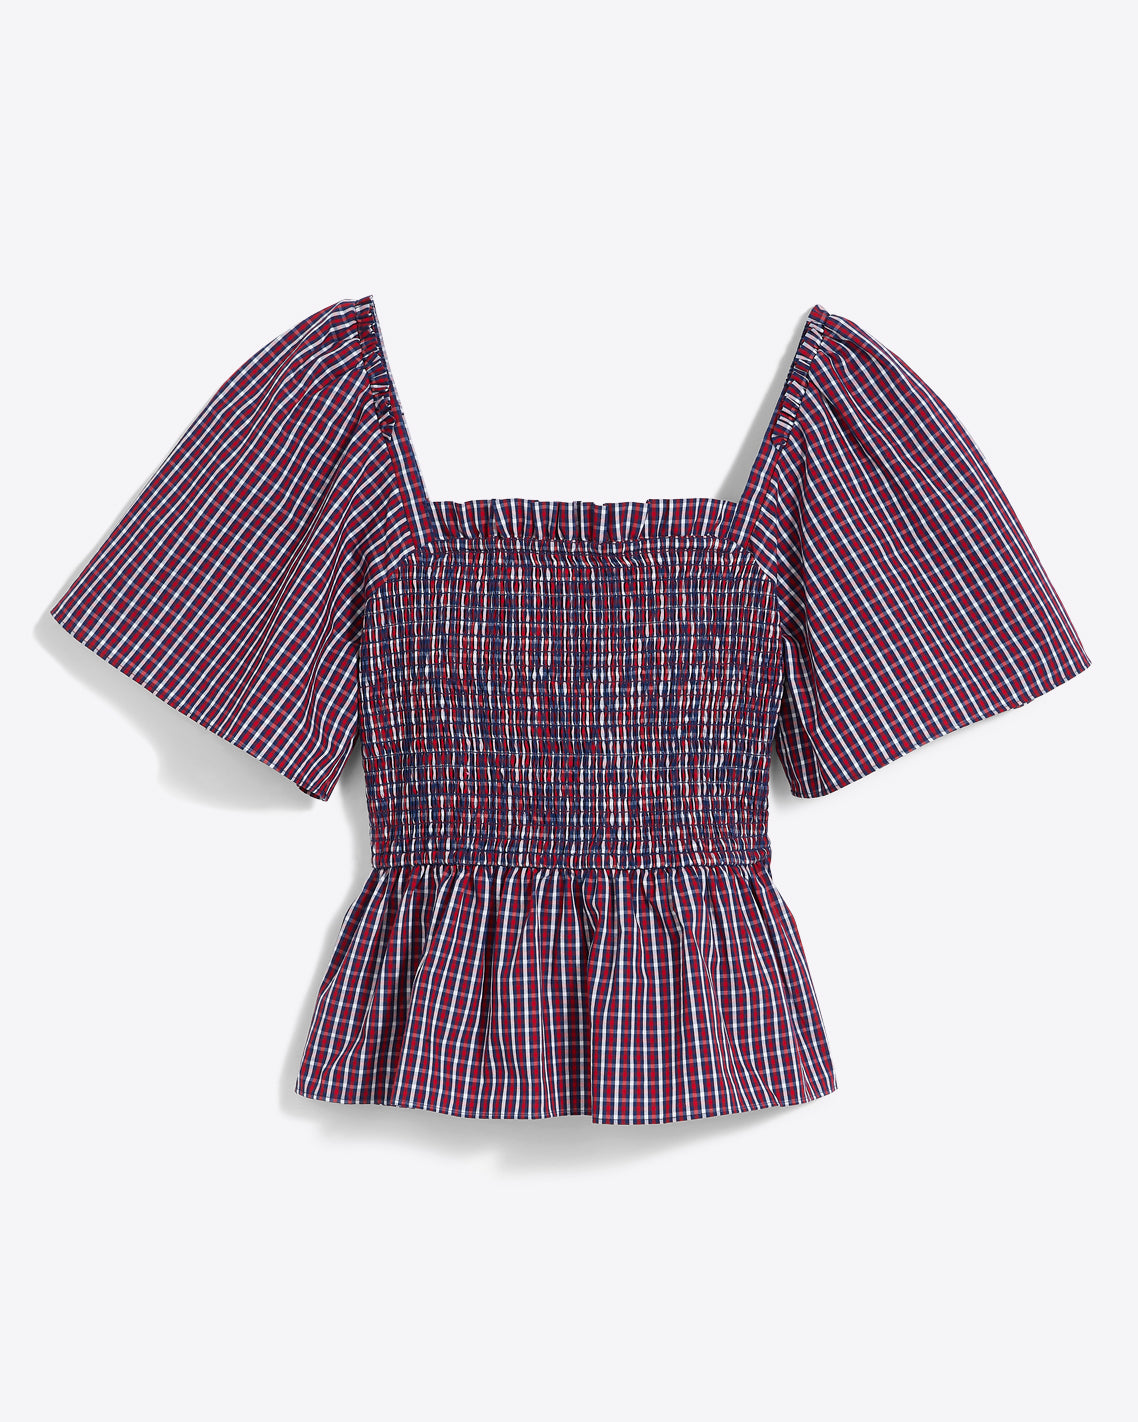 Deana Smocked Top in Picnic Plaid